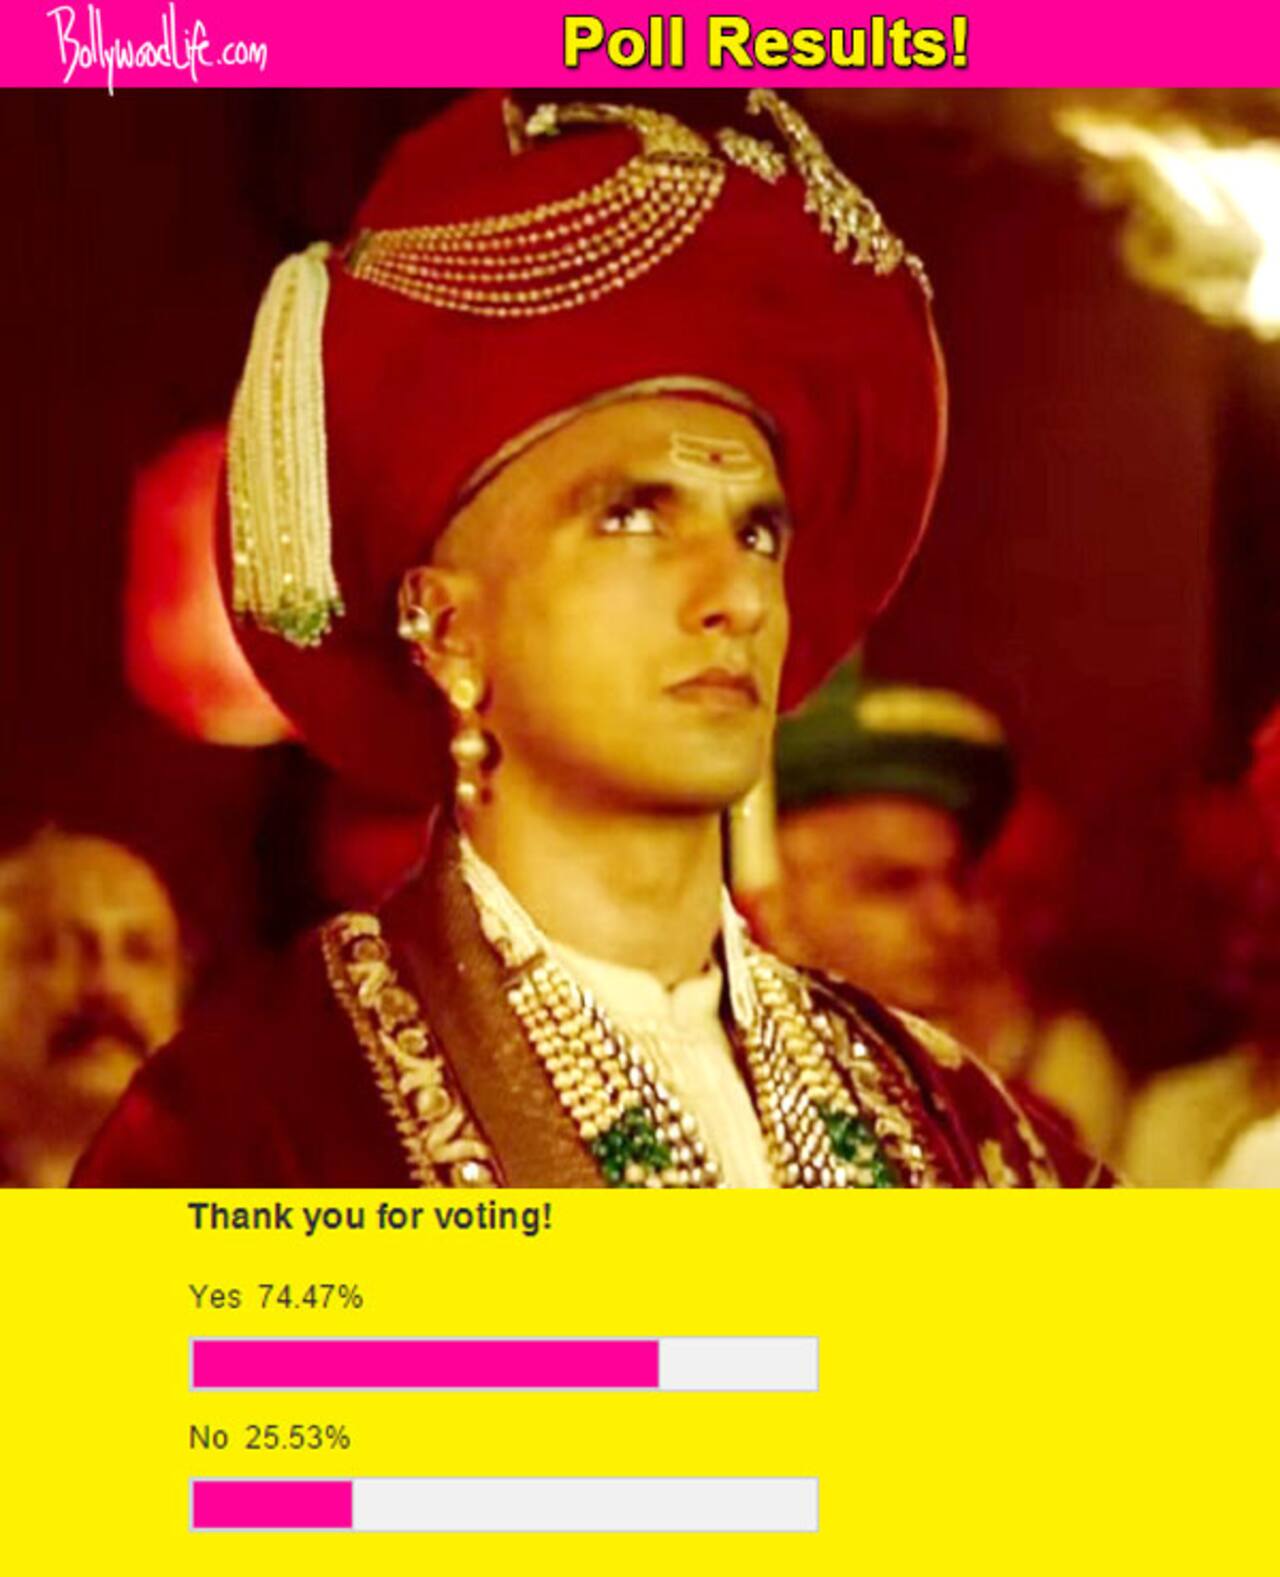 Fans' verdict: Ranveer Singh's gamble of playing the fearless Peshwa in Bajirao Mastani will PAY OFF!